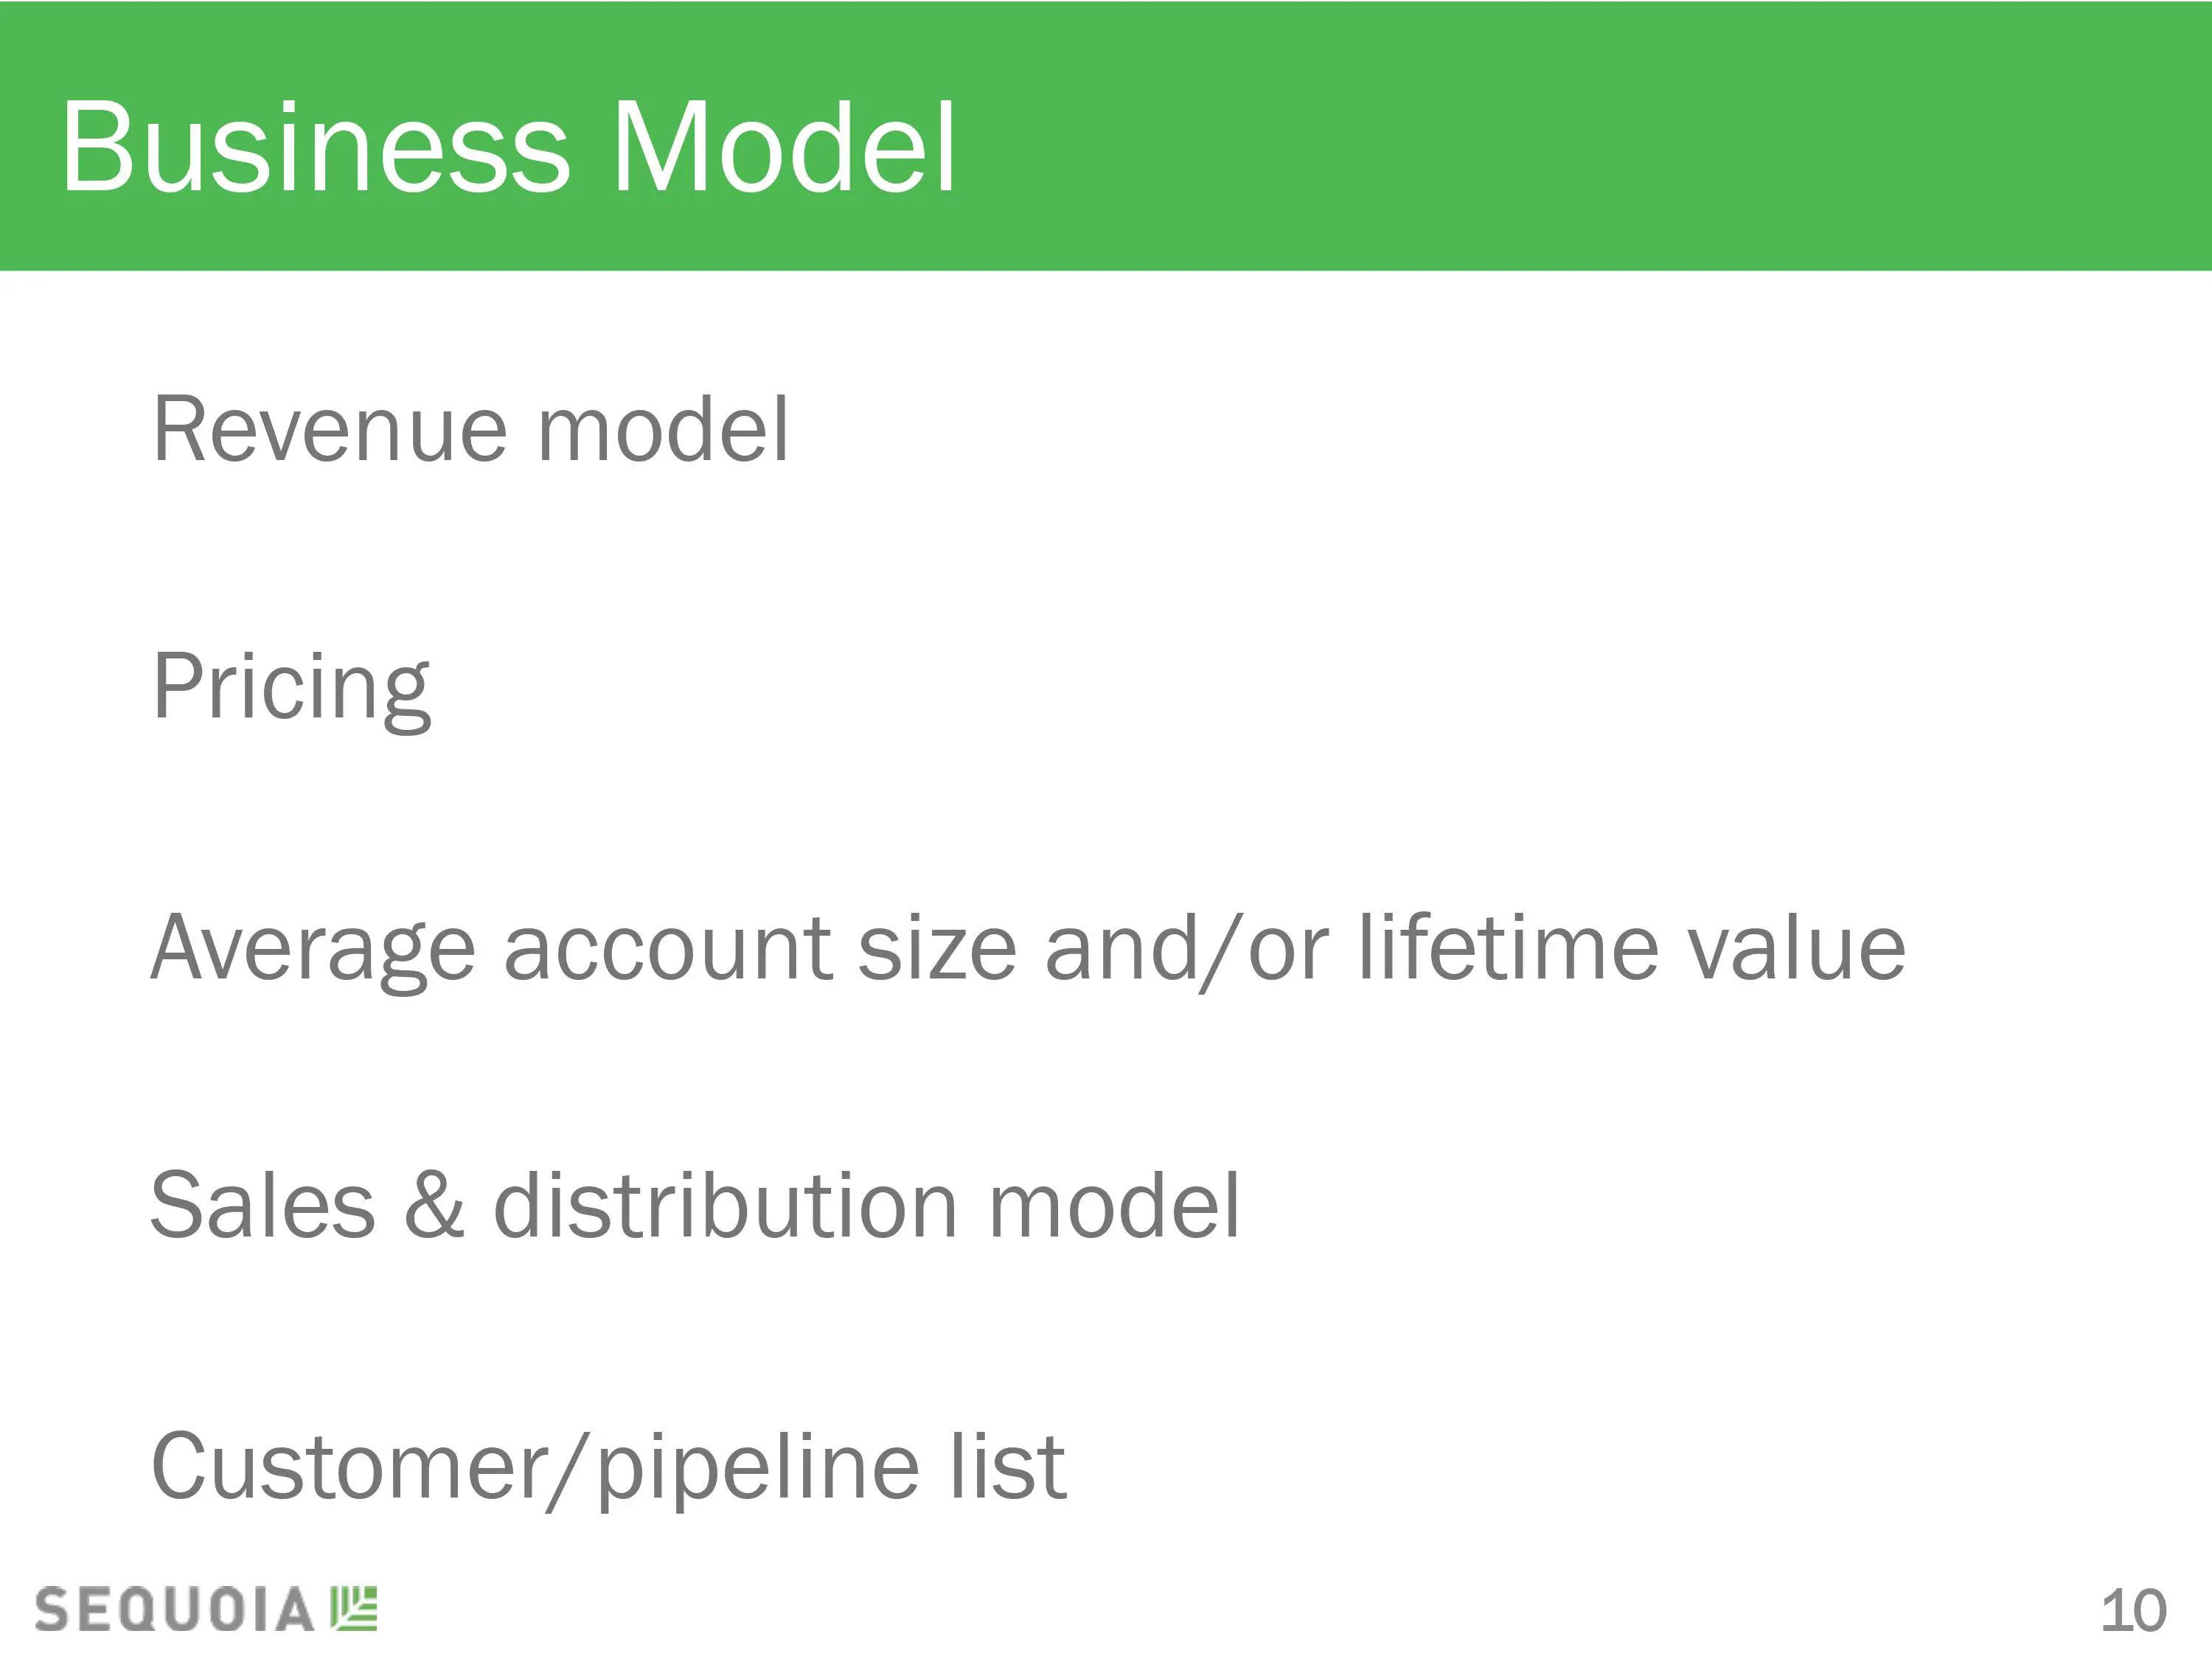 Sequoia Capital pitch deck template. Business Model slide.